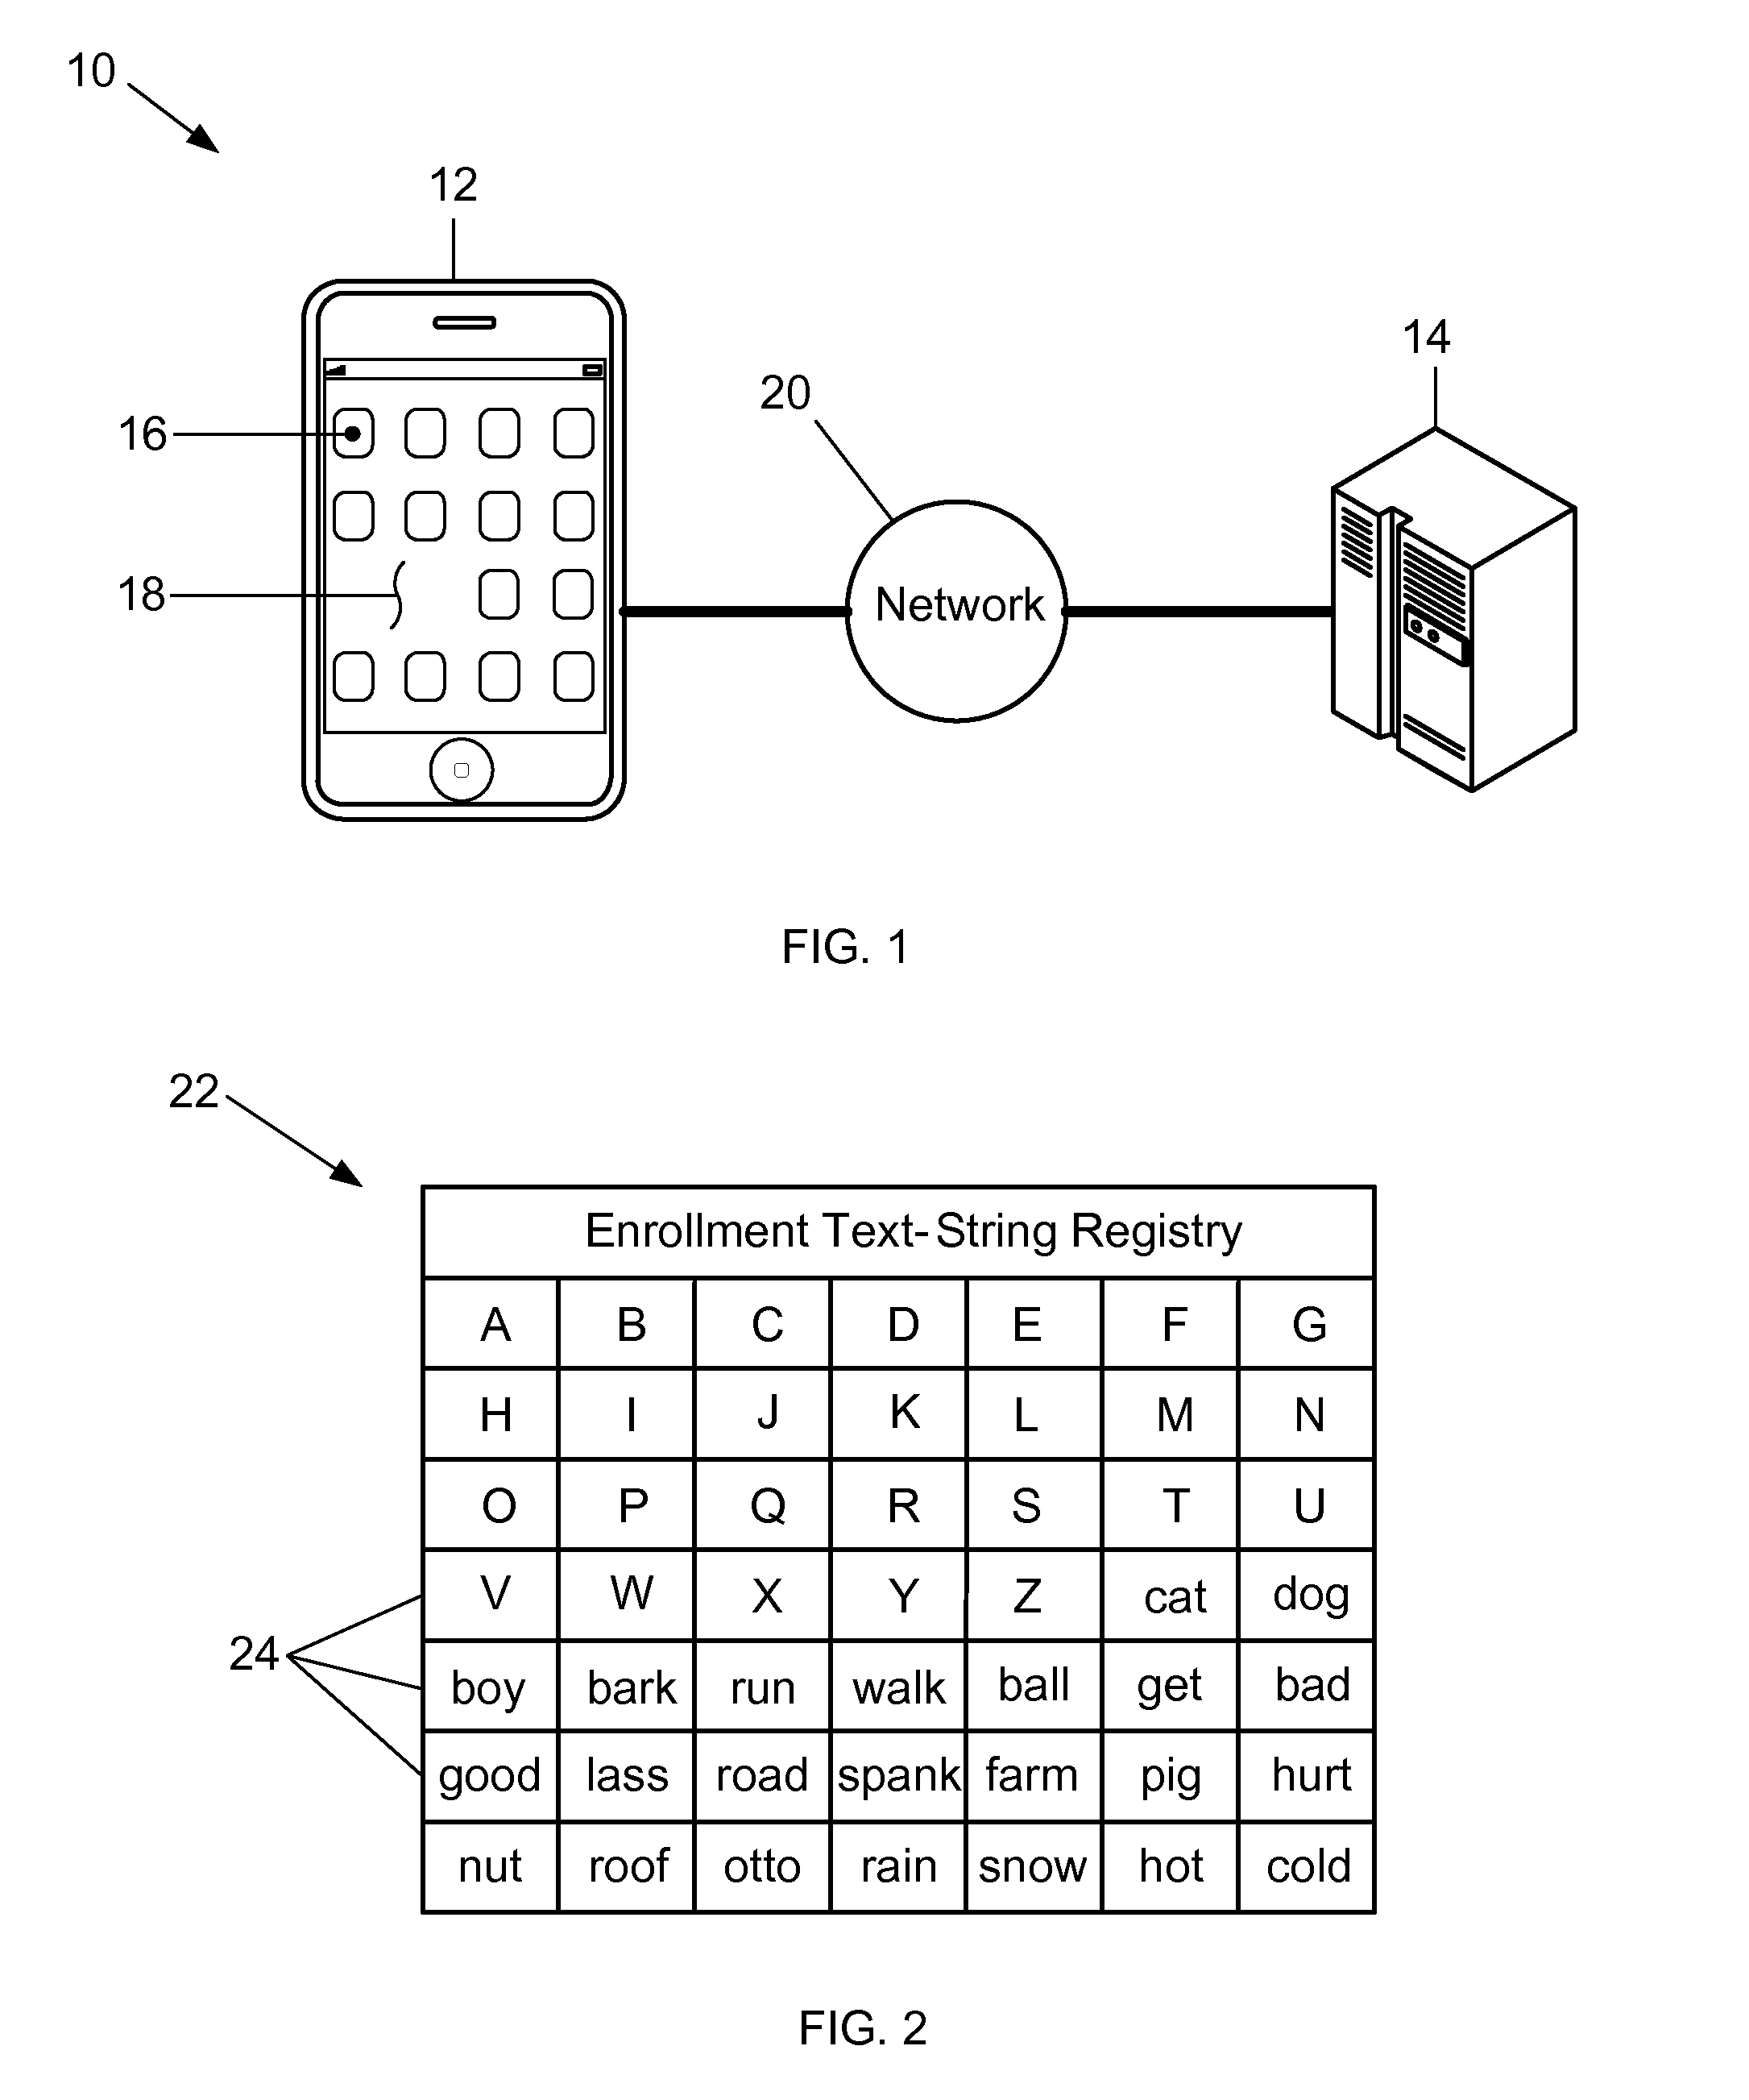 Methods and sysems for improving the security of secret authentication data during authentication transactions